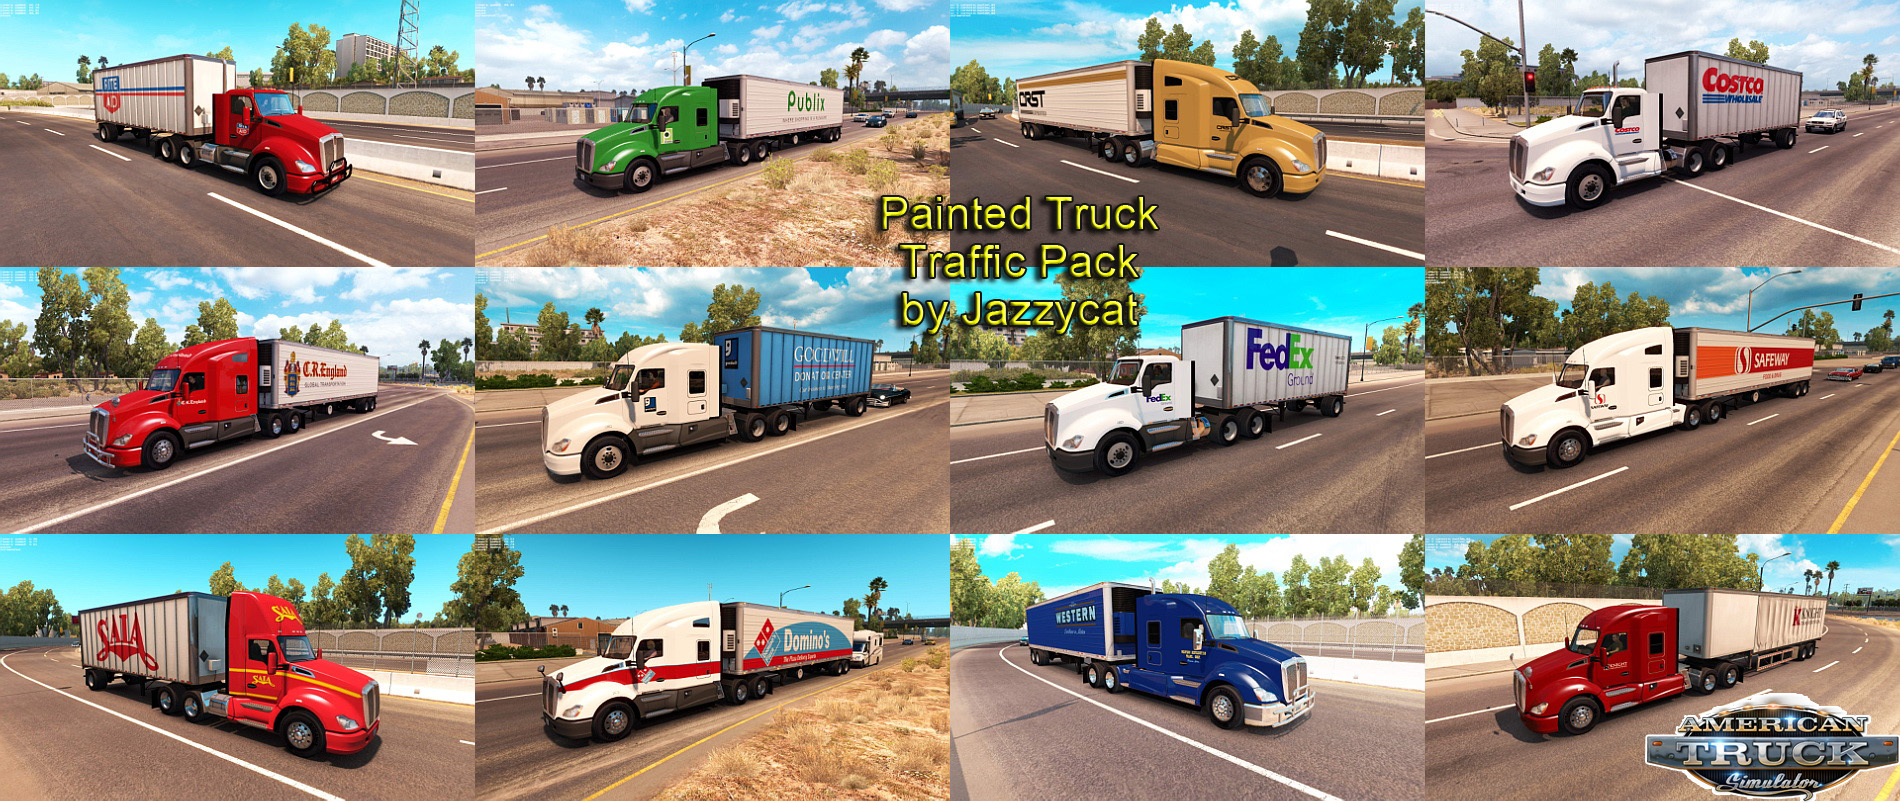 painted_truck_traffic_pack_by_Jazzycat_v1.0_ats.jpg